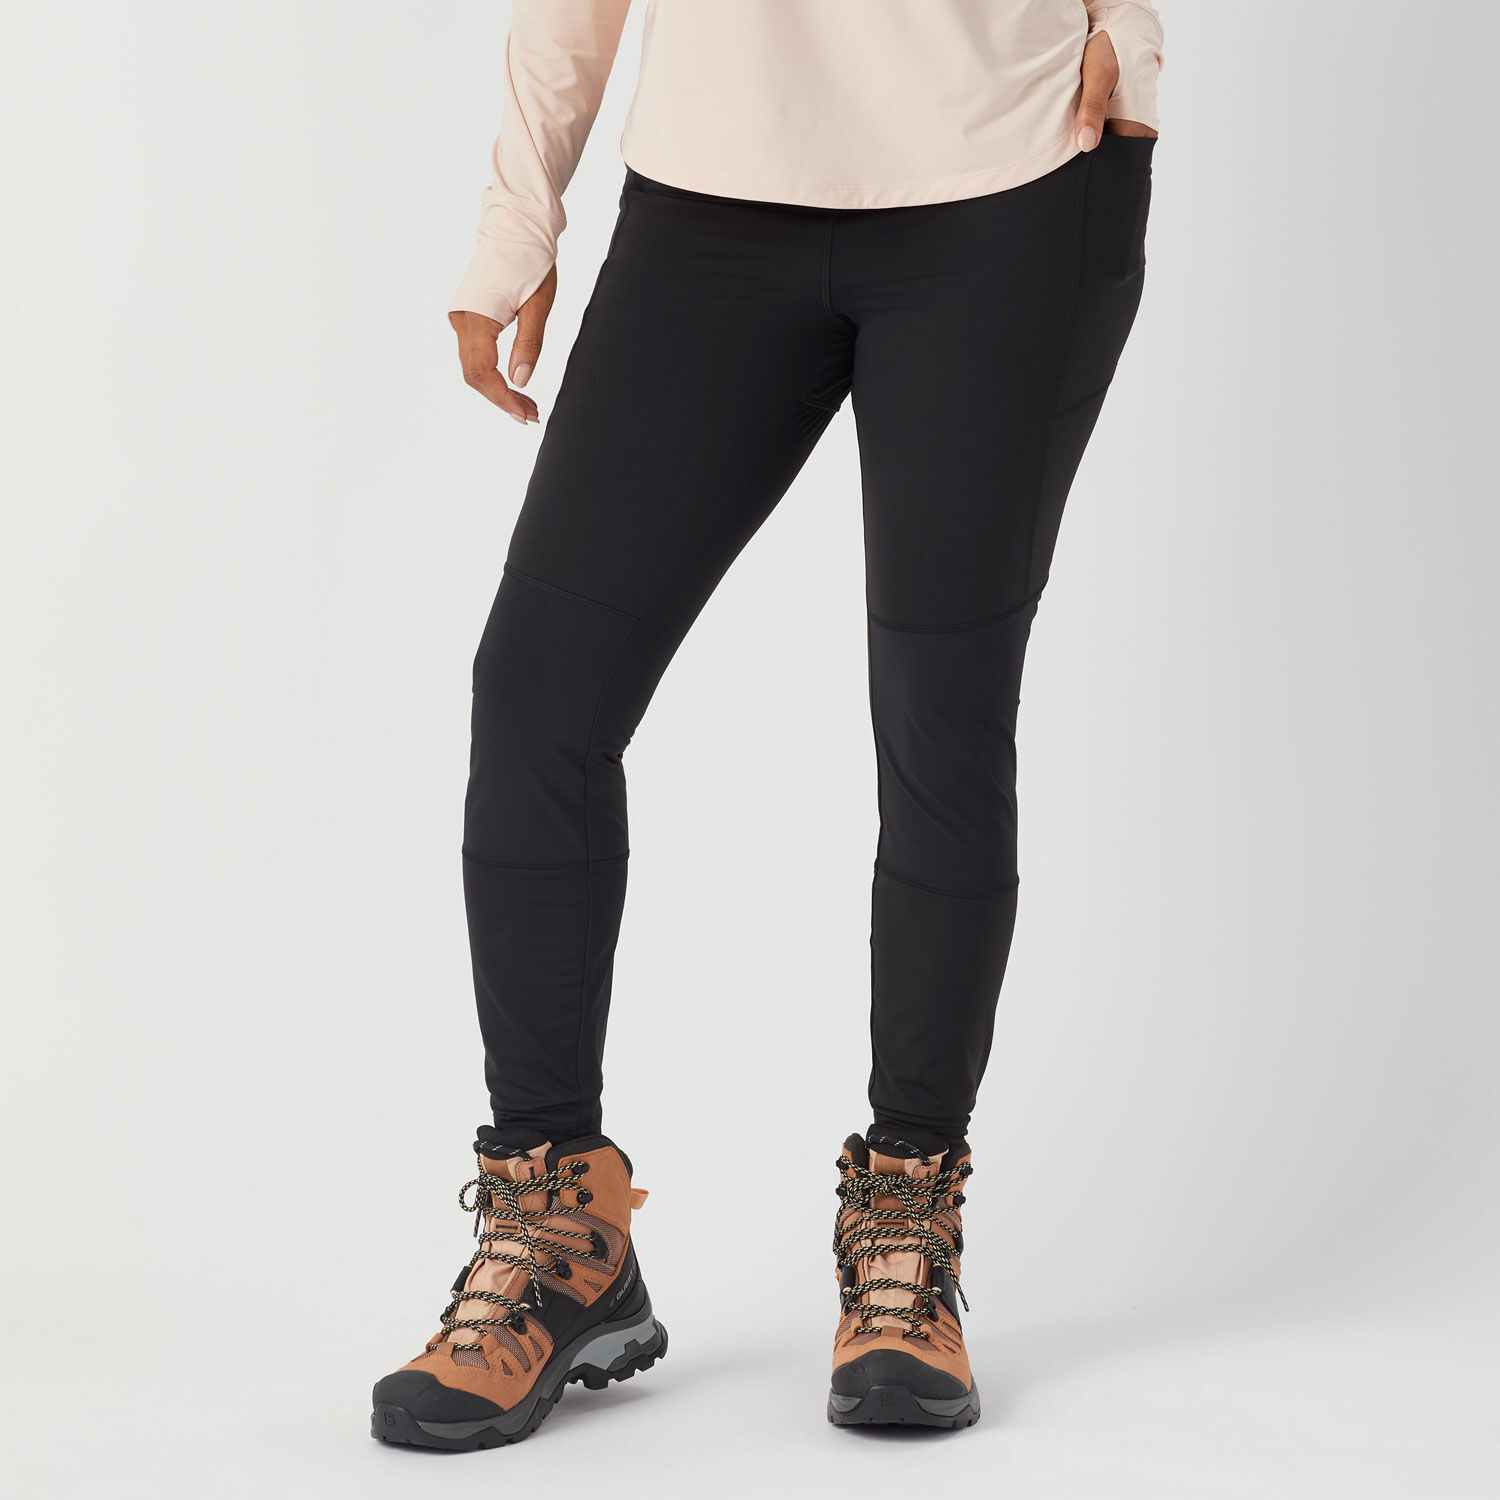 Duluth Trading Co. Solid Black Leggings Size XXL - 26% off | ThredUp